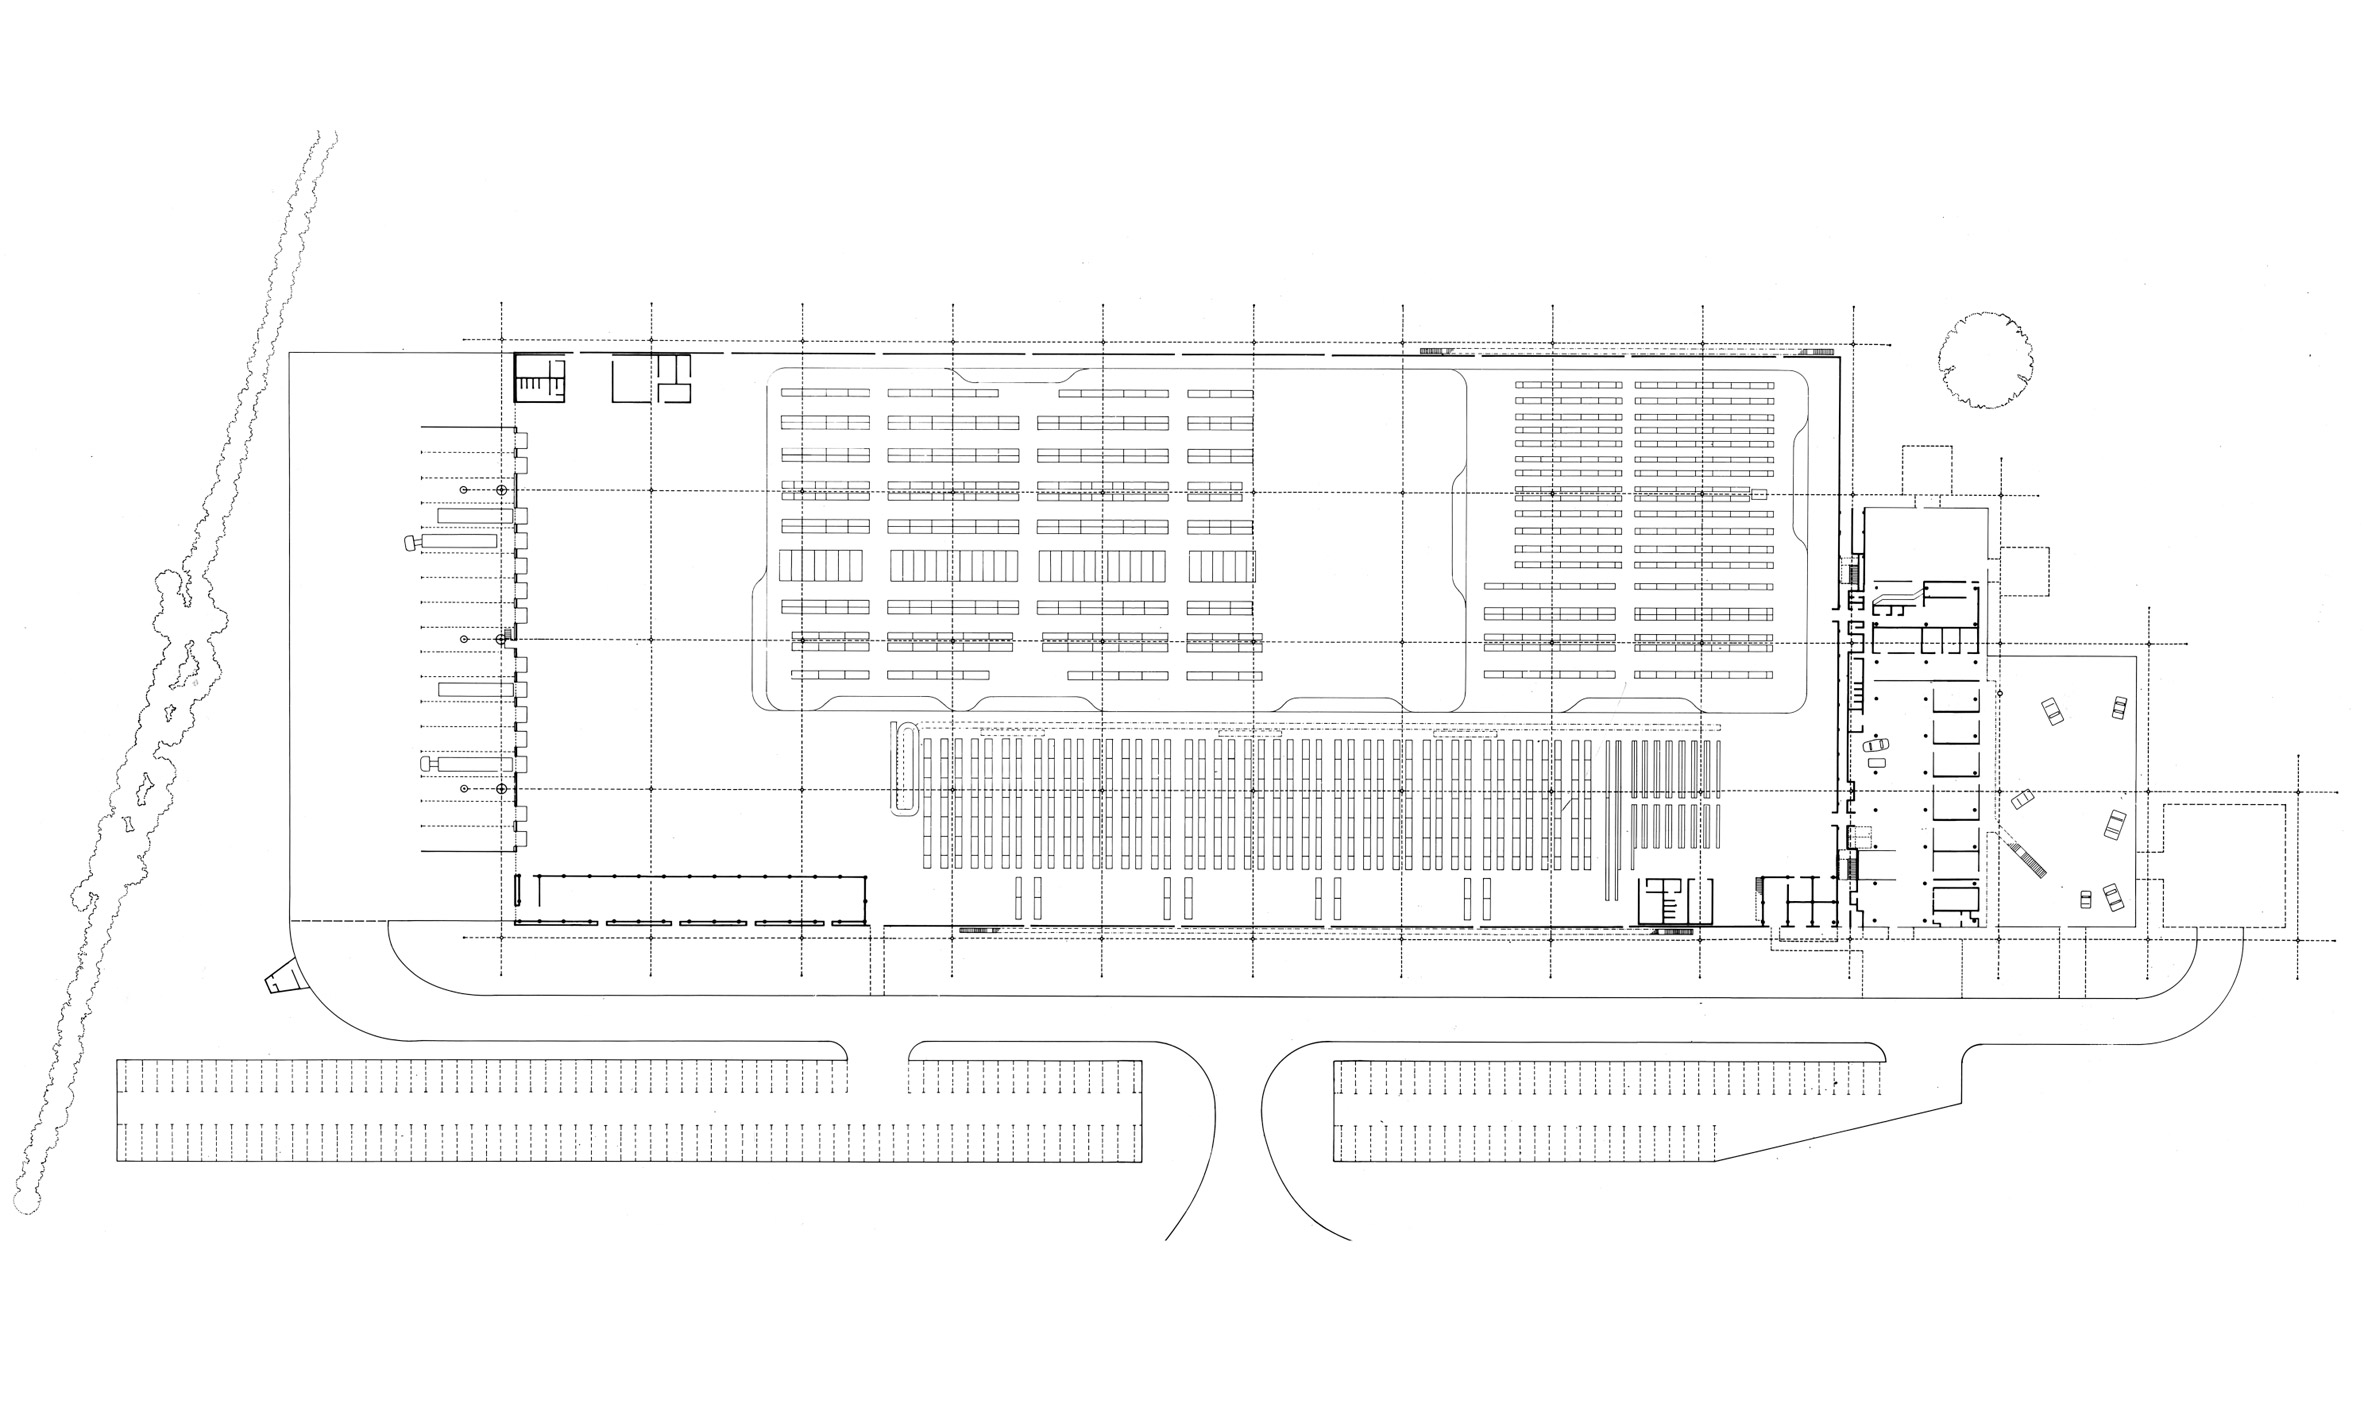 High-tech architecture: Renault Distribution Centre by Norman Foster